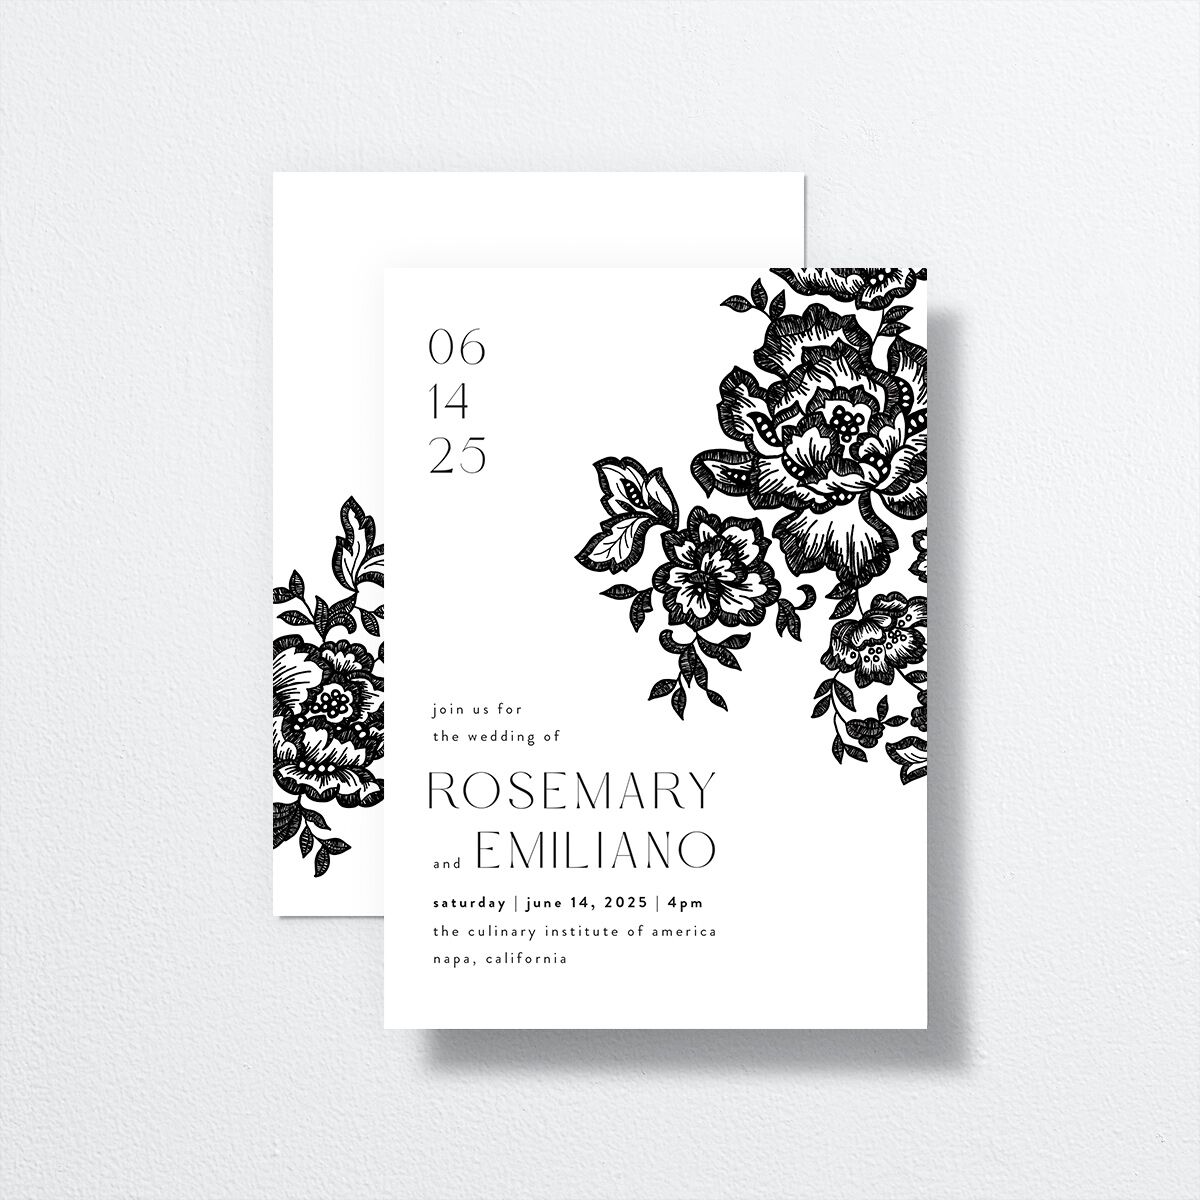 Etched Florals Wedding Invitations by Vera Wang front-and-back